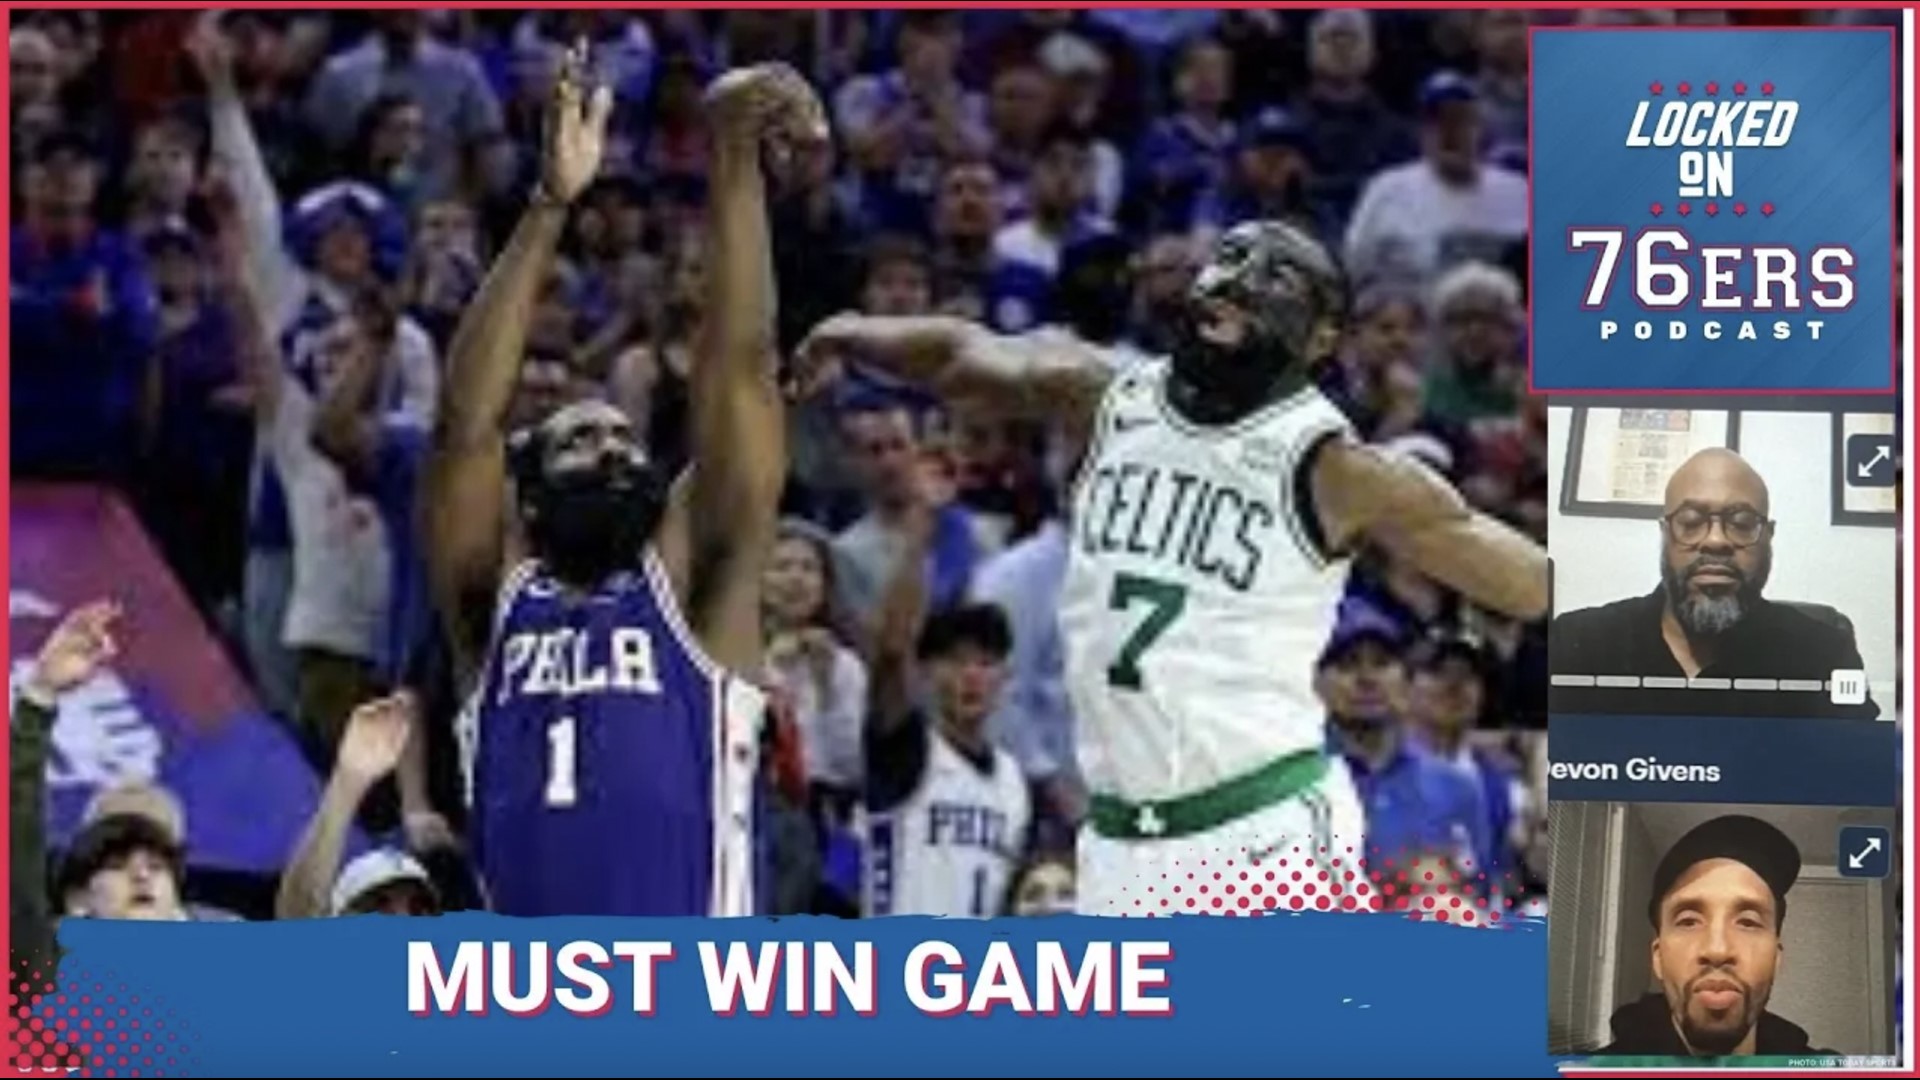 Is Game 5 of the Eastern Conference semifinals series against the Boston Caltics a must-win for the 76ers? Devon Givens and Keith Pompey answer that question